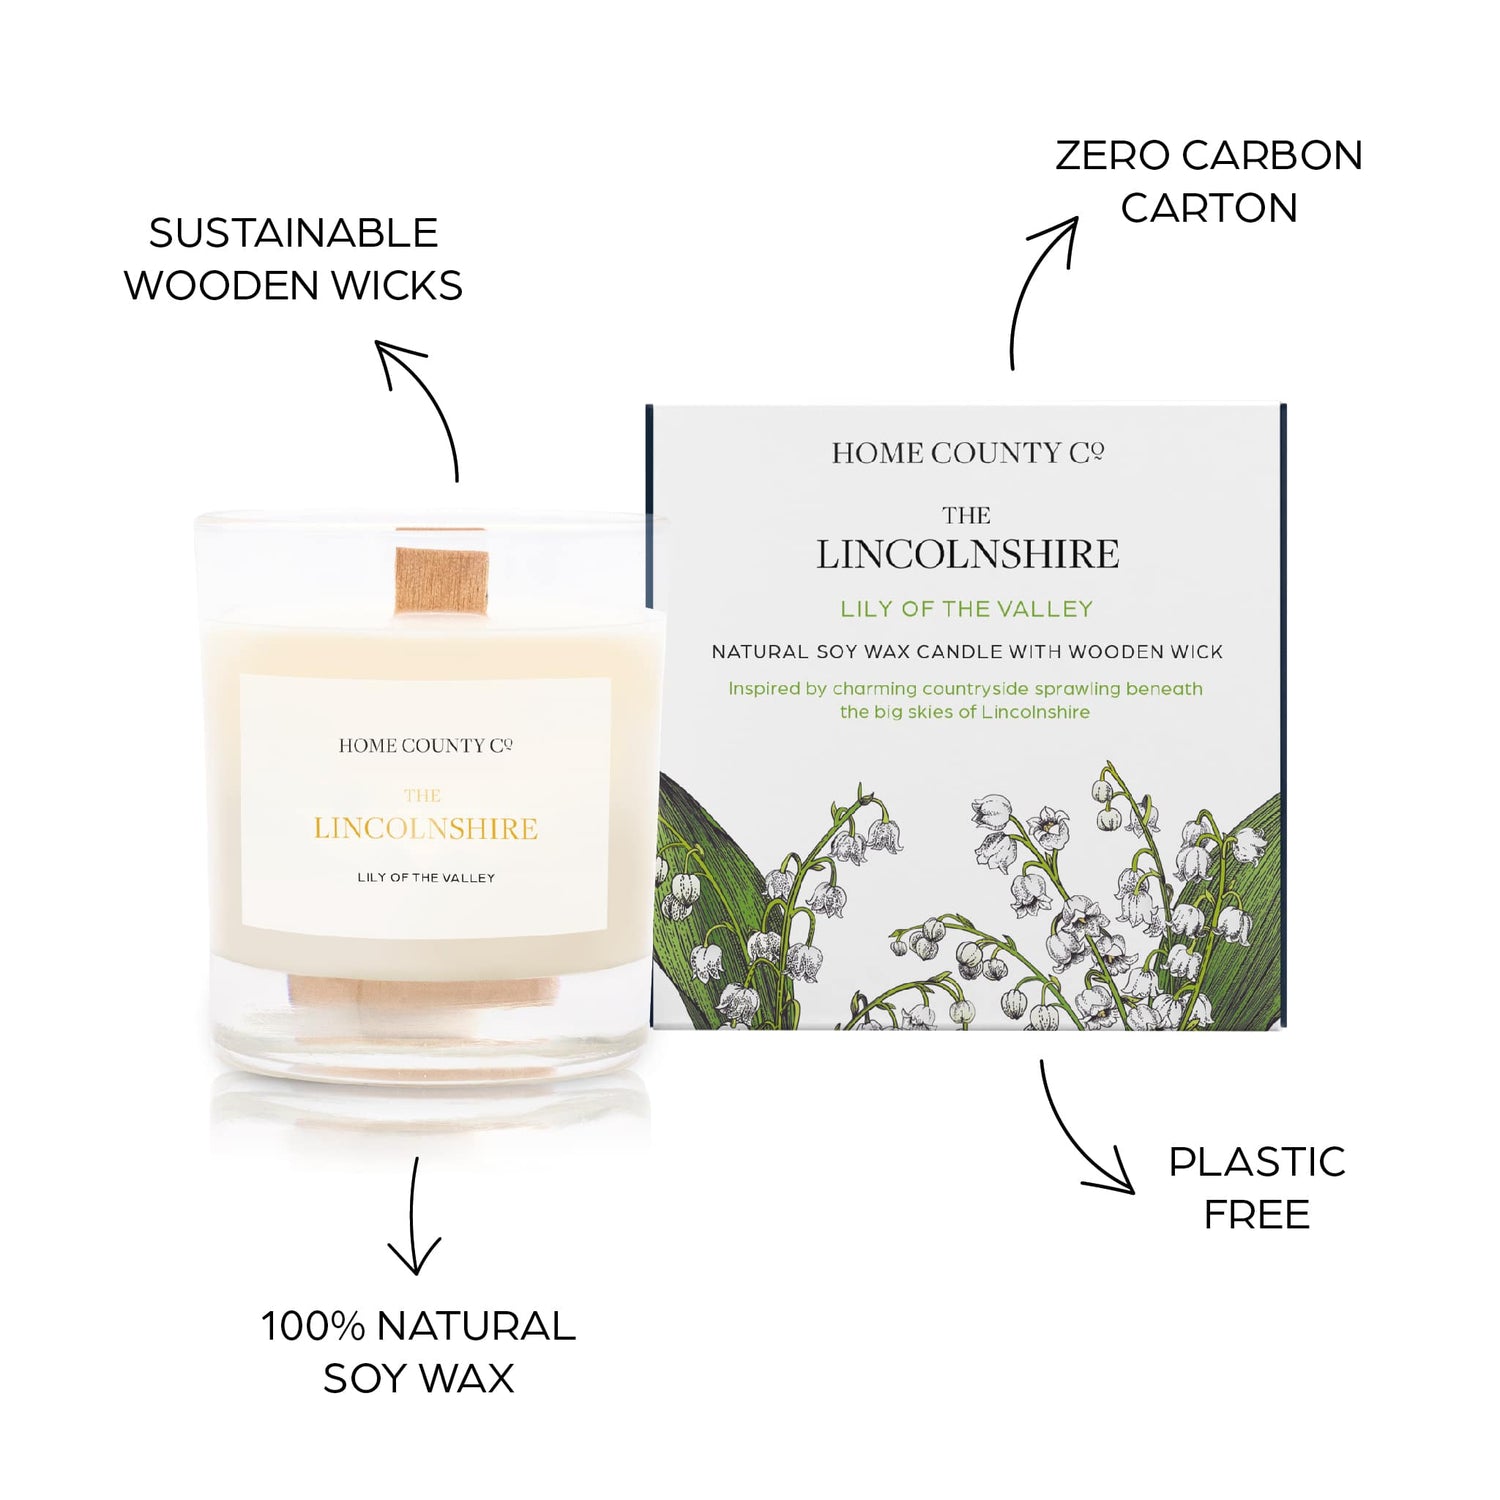 Sustainable candle credentials are shown around the floral scented candle image - sustainable wooden wicks, zero carbon carton, 100% natural soy wax, plastic free